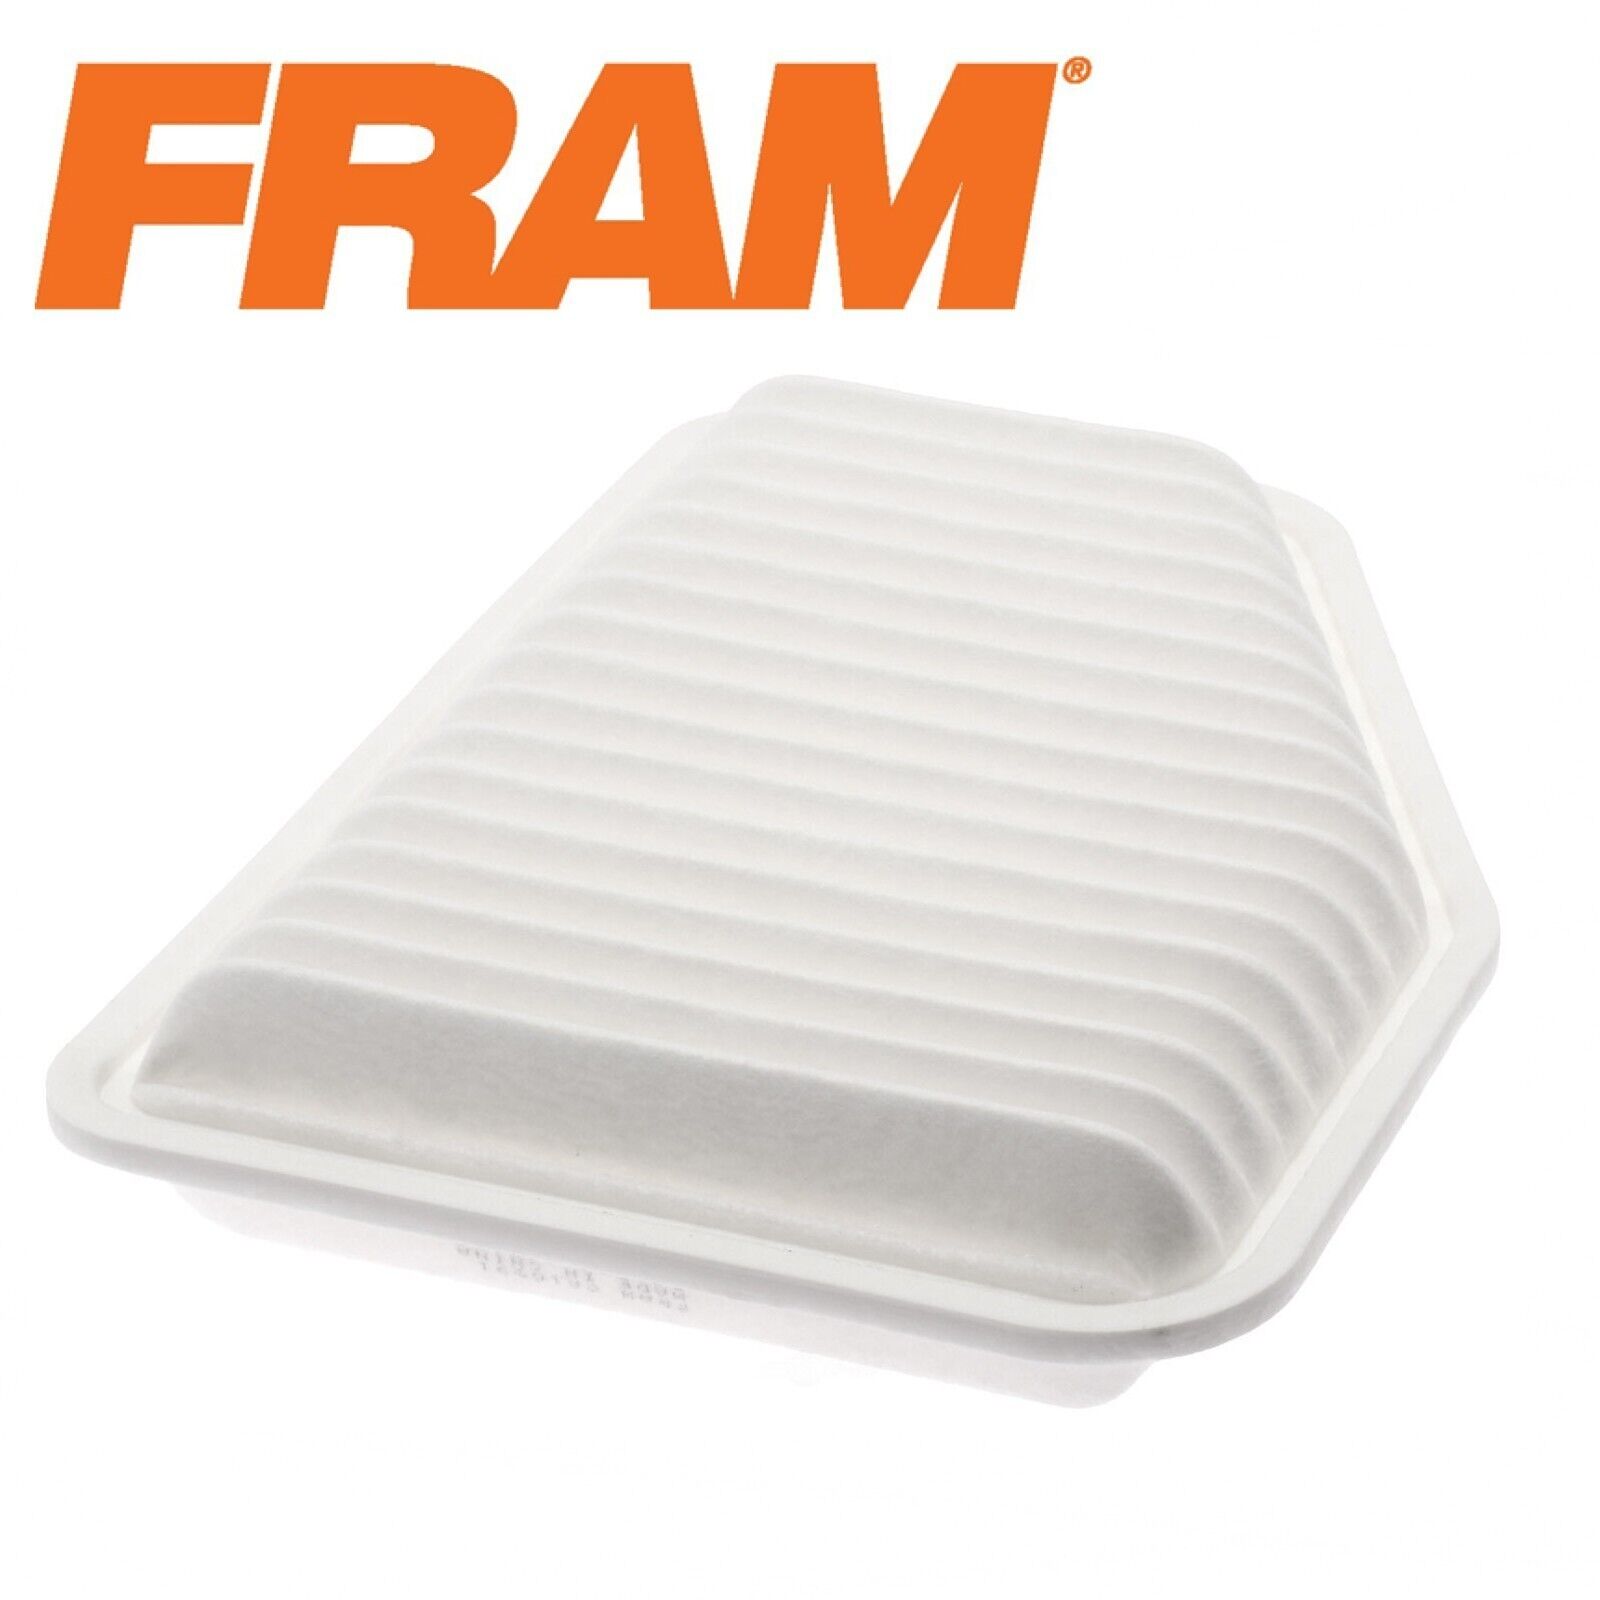 NEW FRAM CA10591 Extra Guard Air Filter- For Chevrolet, Caprice, SS